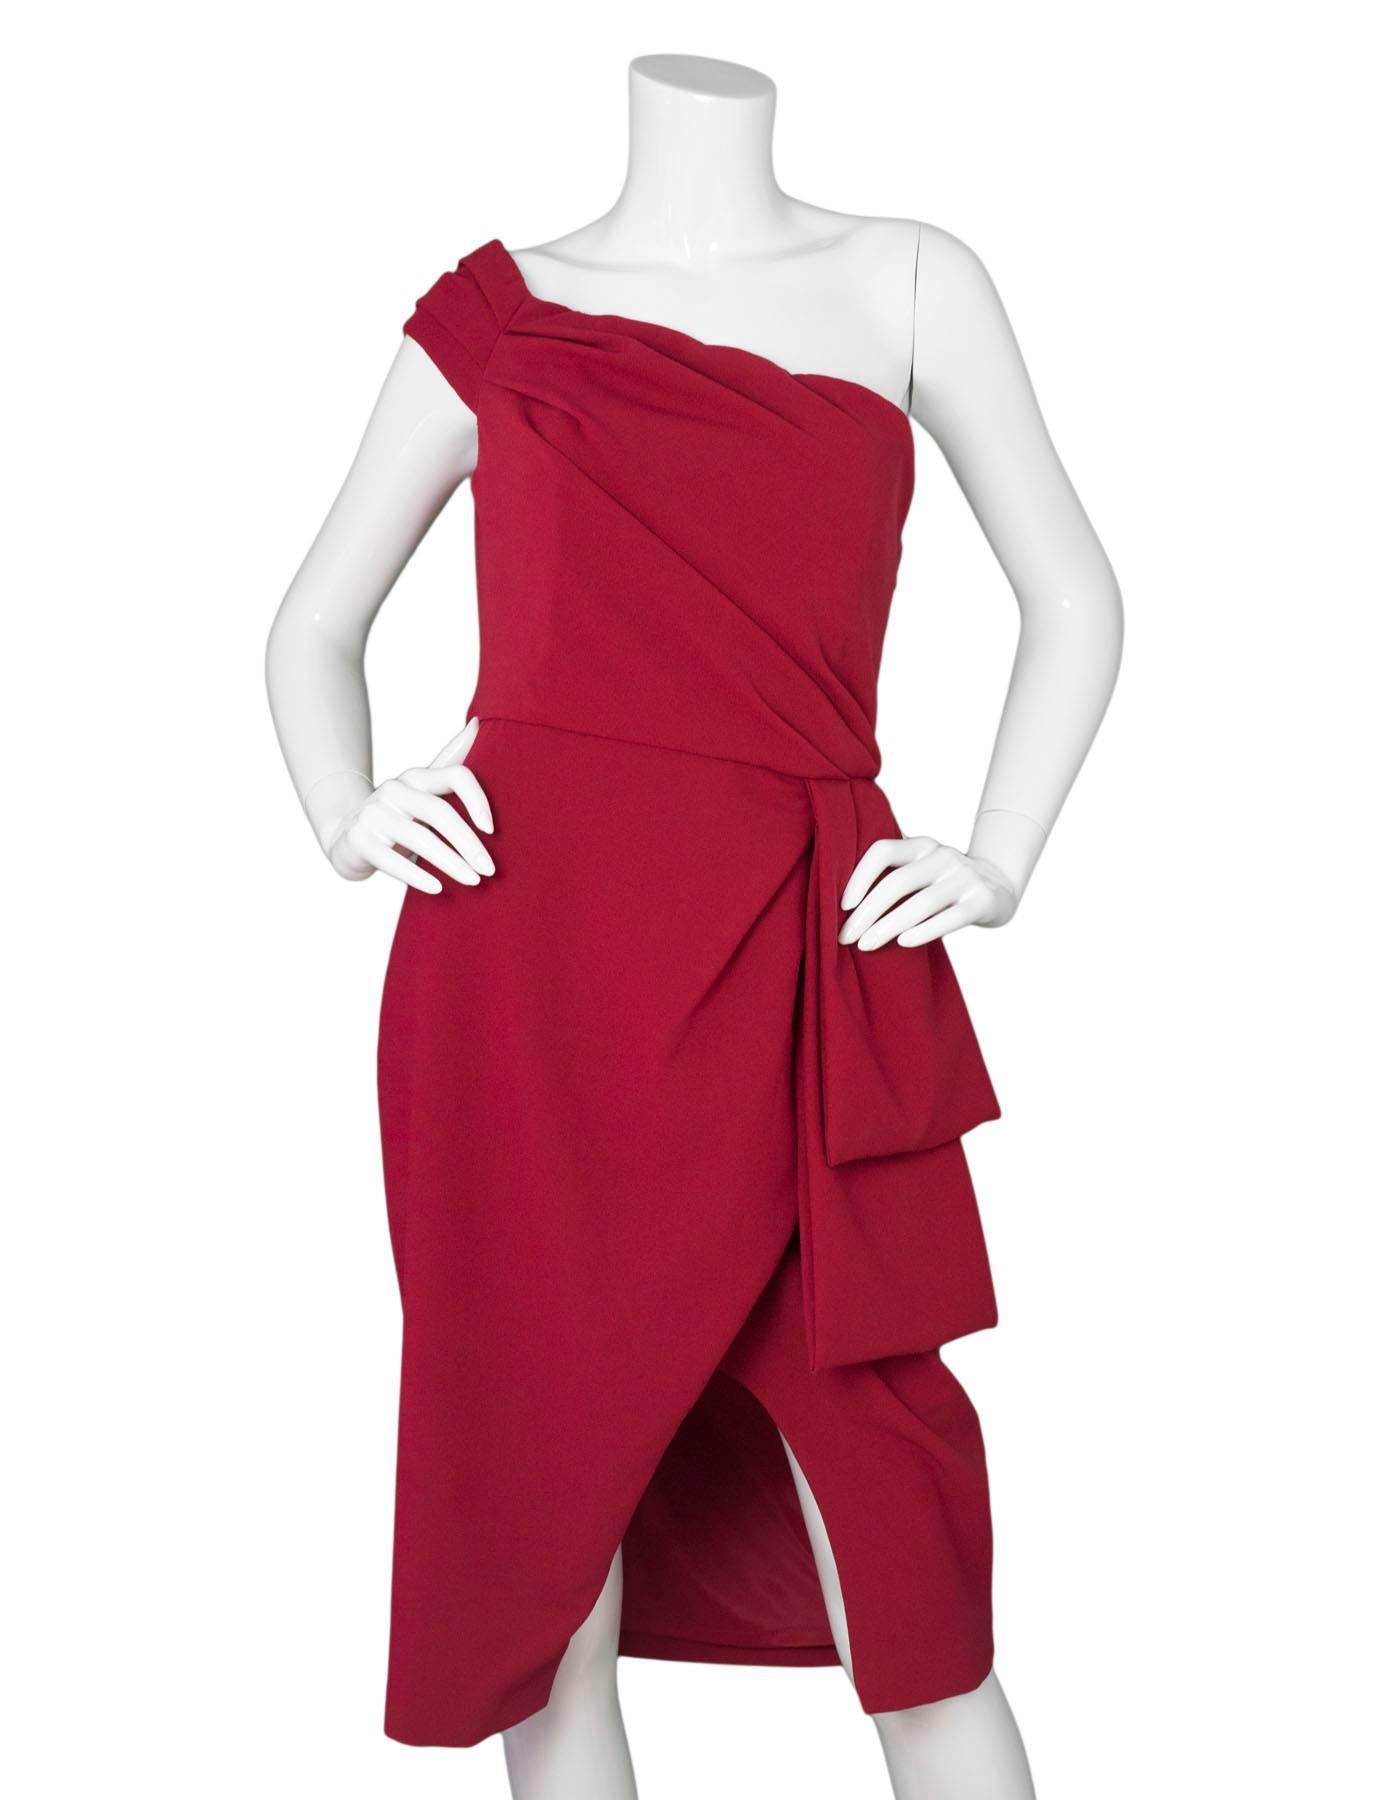 Black Halo Red Angelica Asymmetrical Dress
Features asymmetric neckline and pleating at hip

Made In: USA
Color: Brick red
Composition: 77% polyamide, 16% viscose, 7% spandex
Lining: Red, 95% polyamide, 5% spandex
Closure/Opening: Hidden side